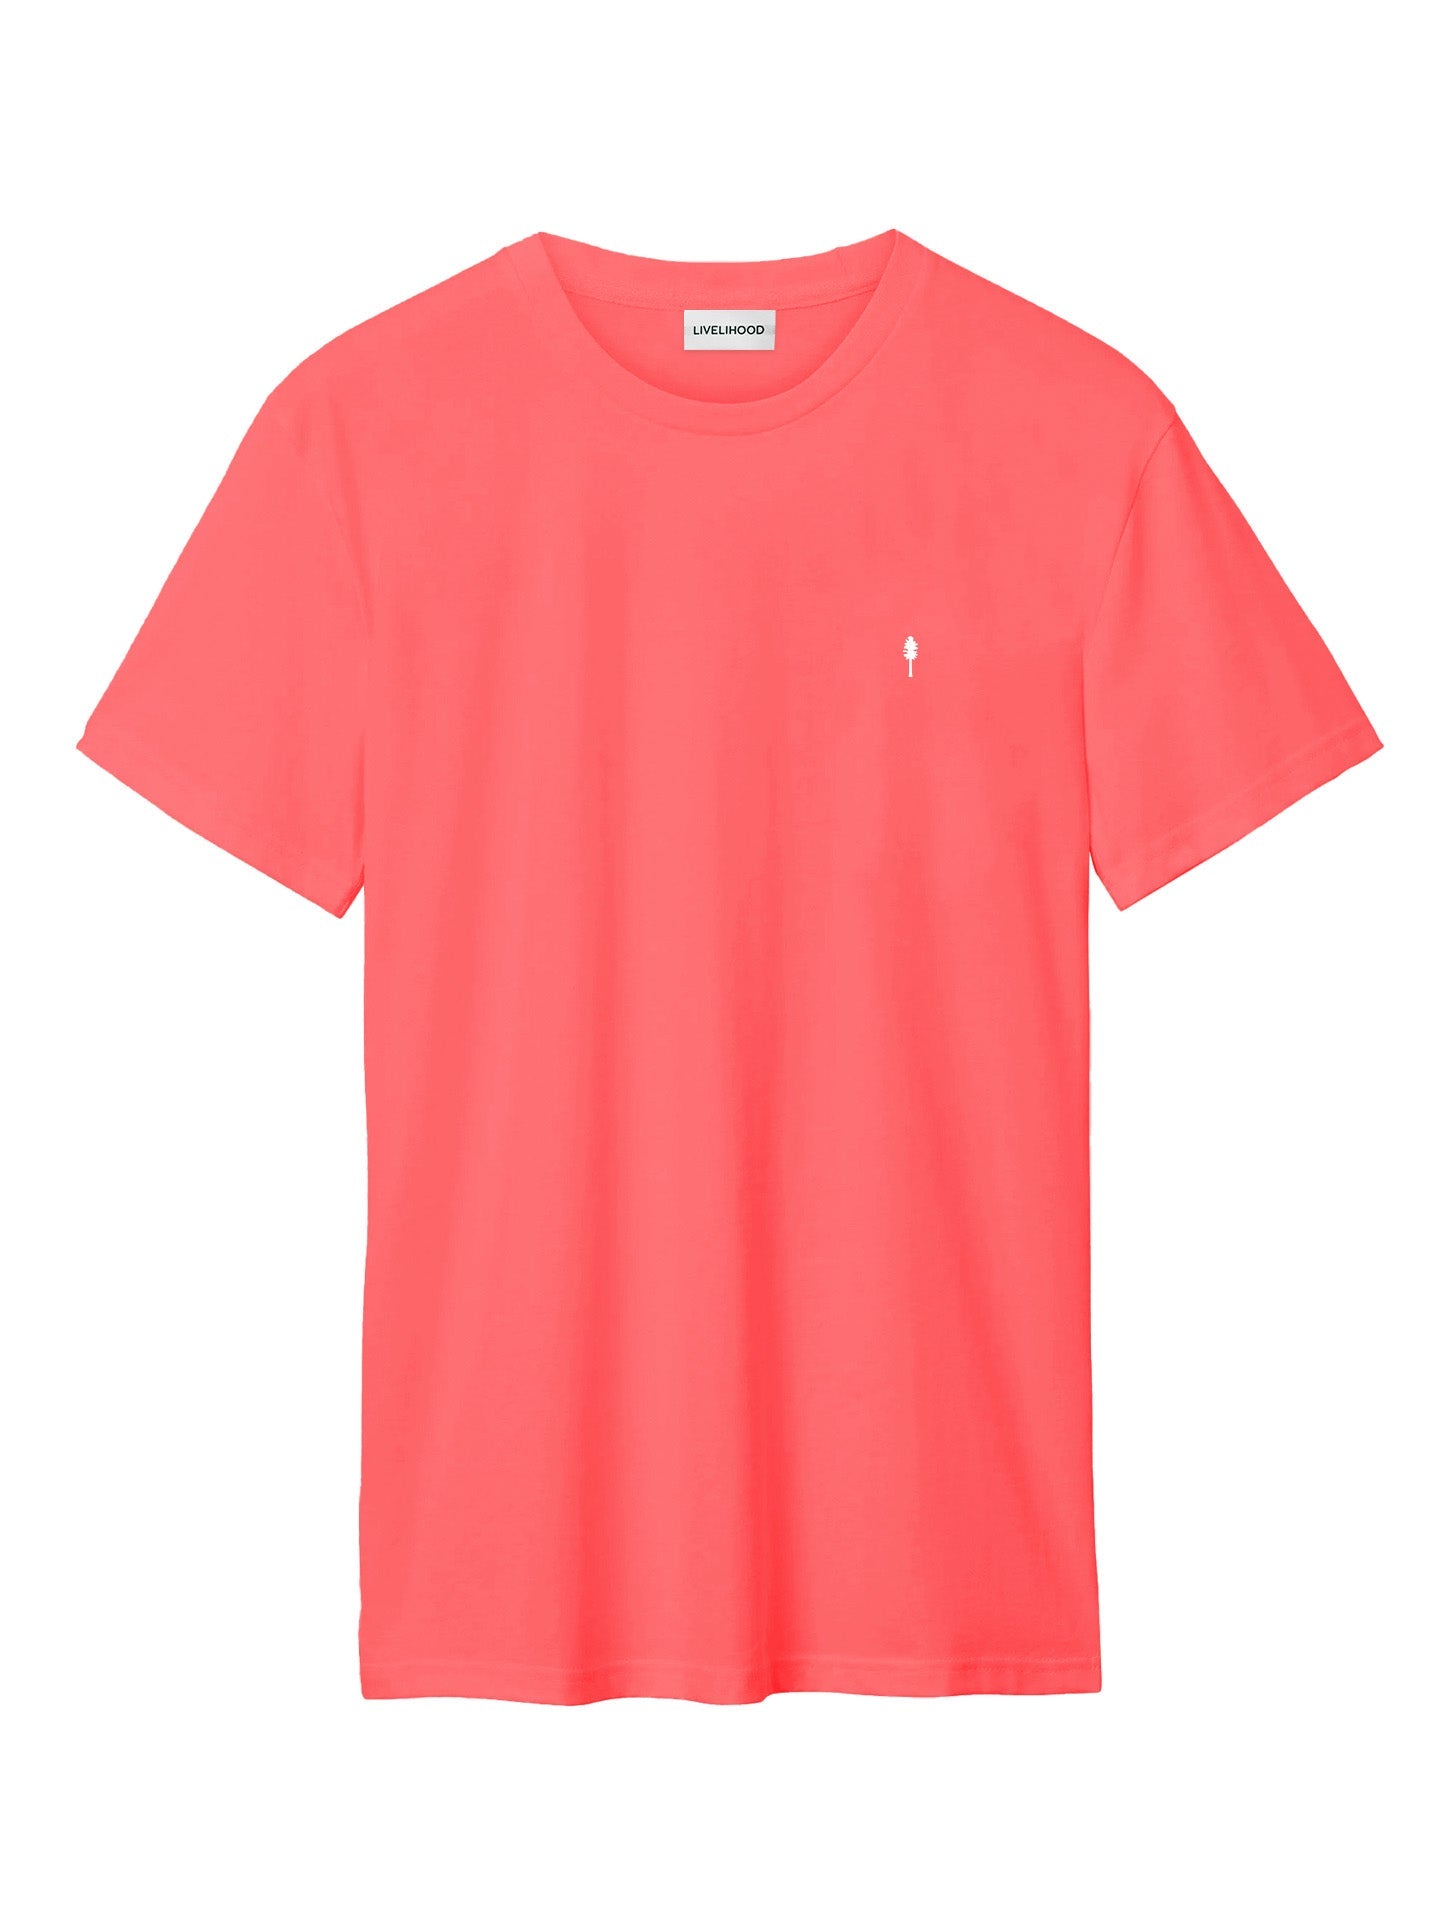 The T-Shirt - Hot Coral